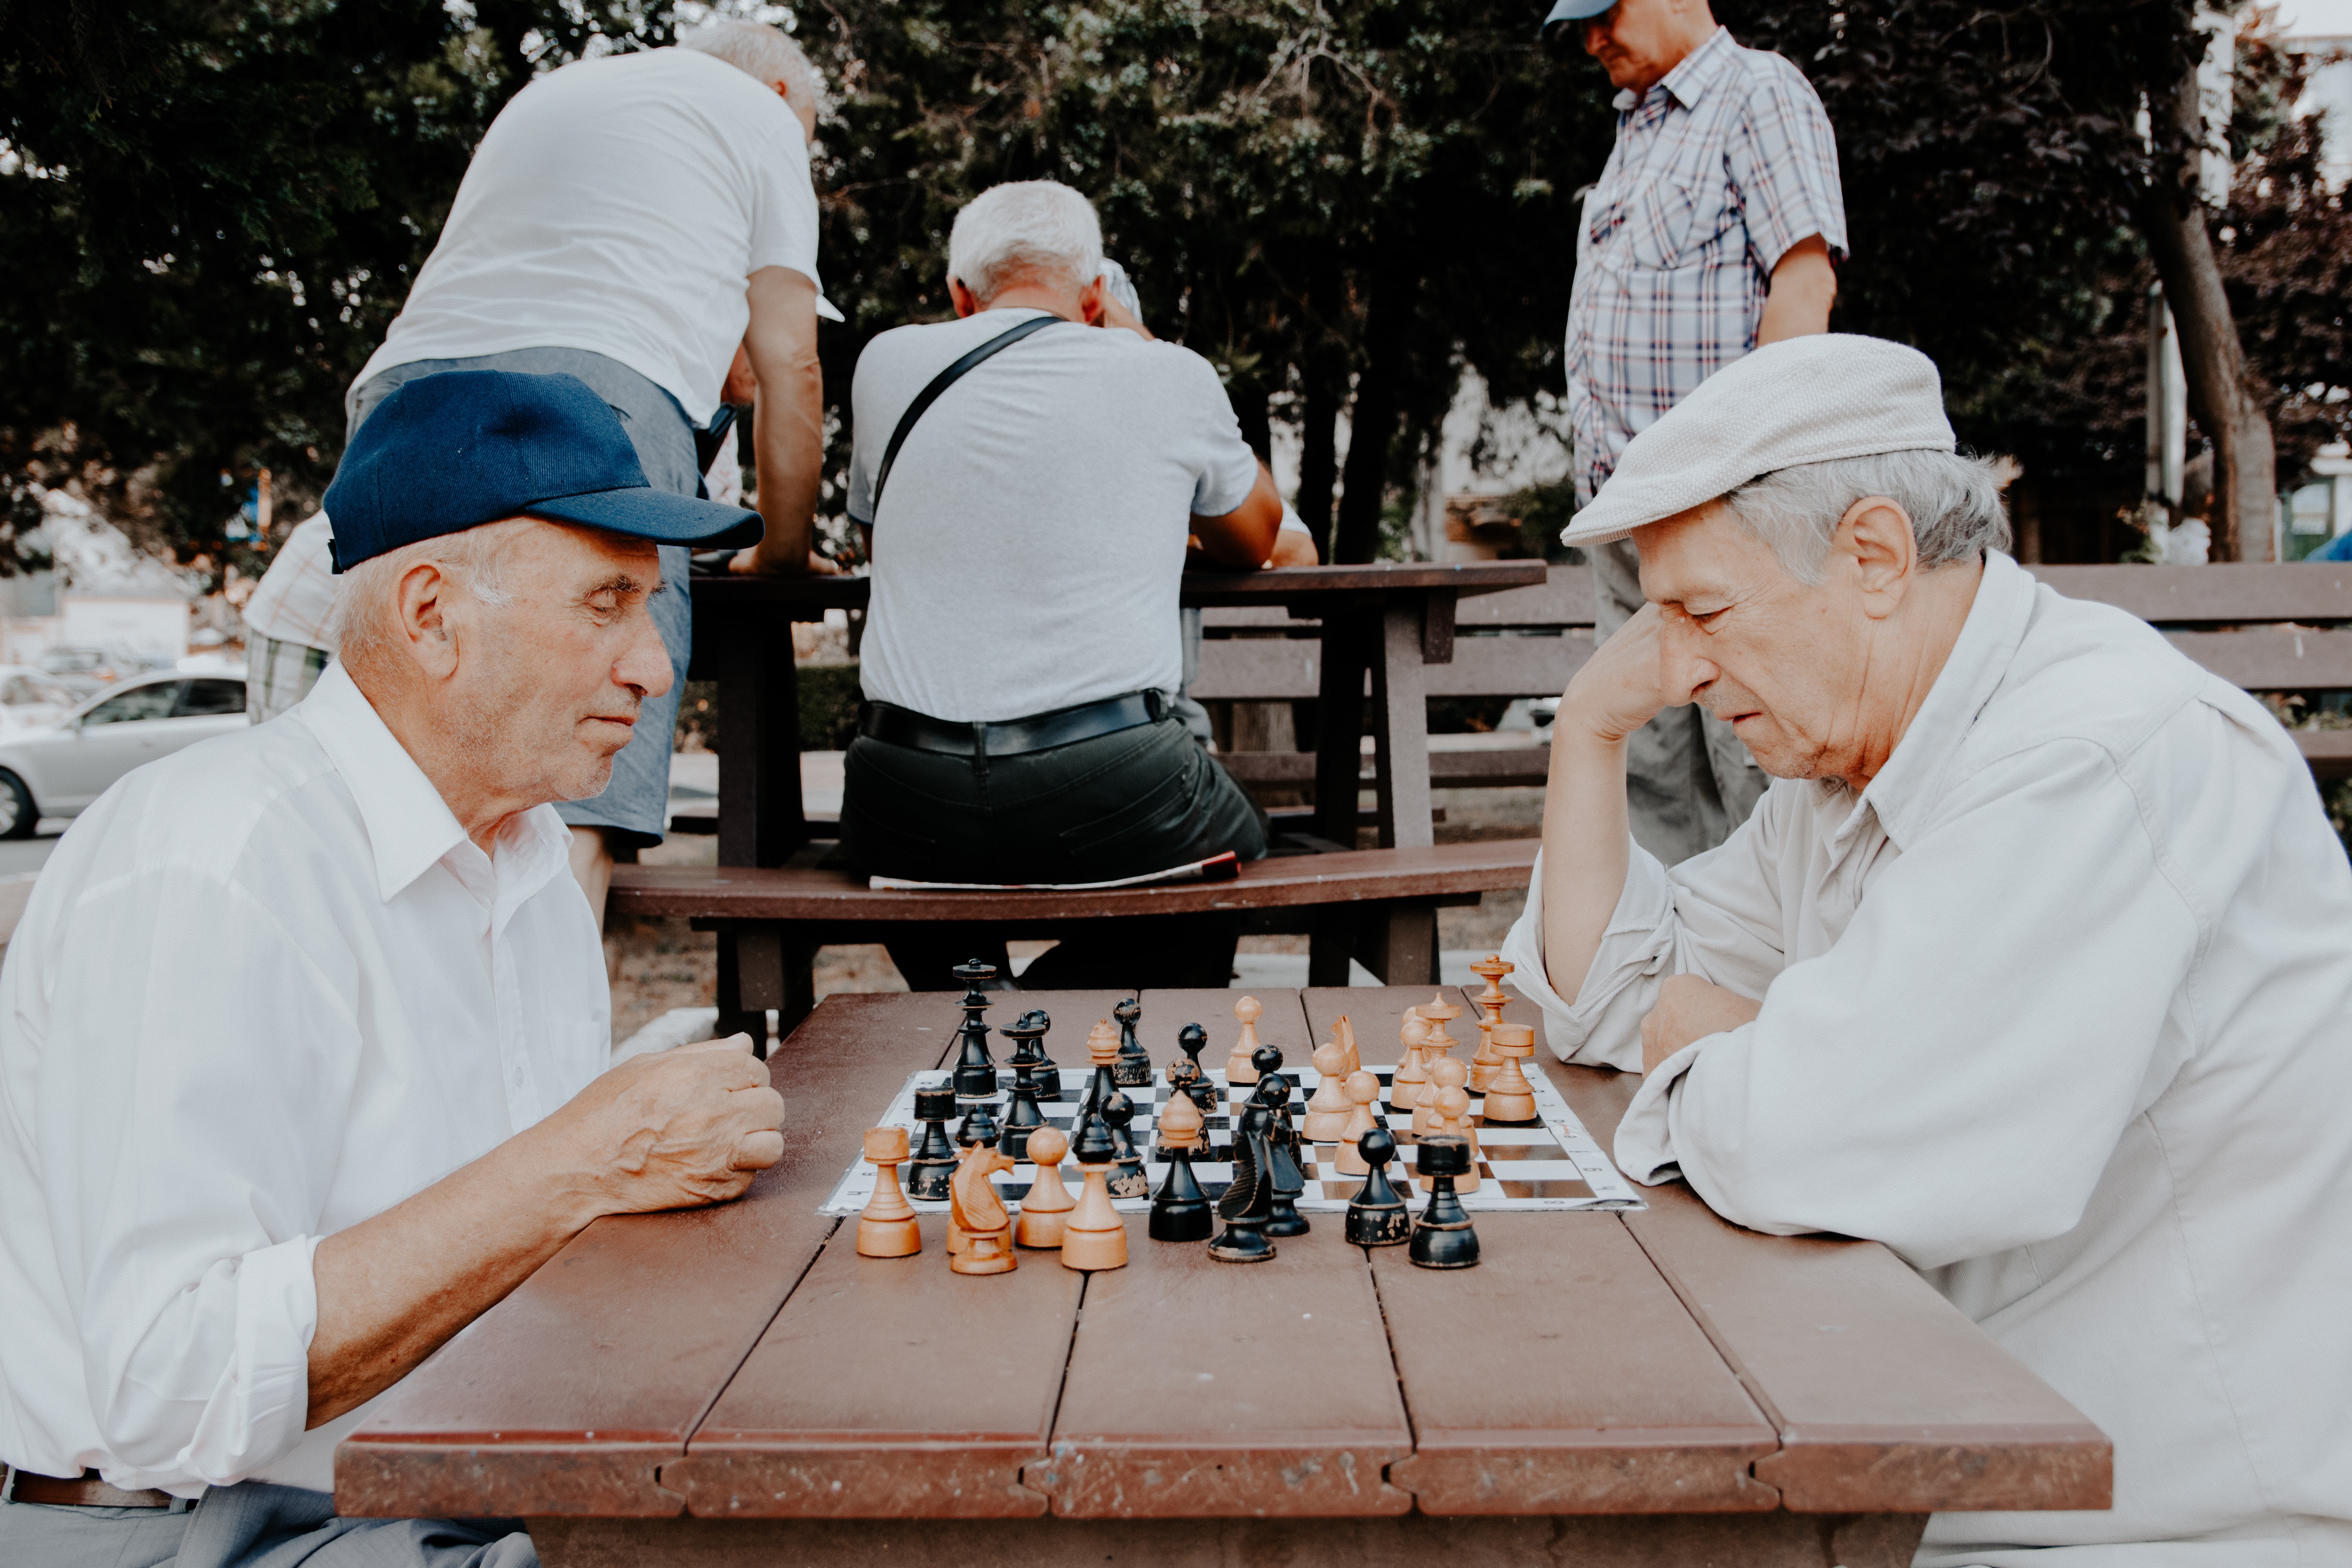 The Top 5 New Hobbies for The Elderly In 2021